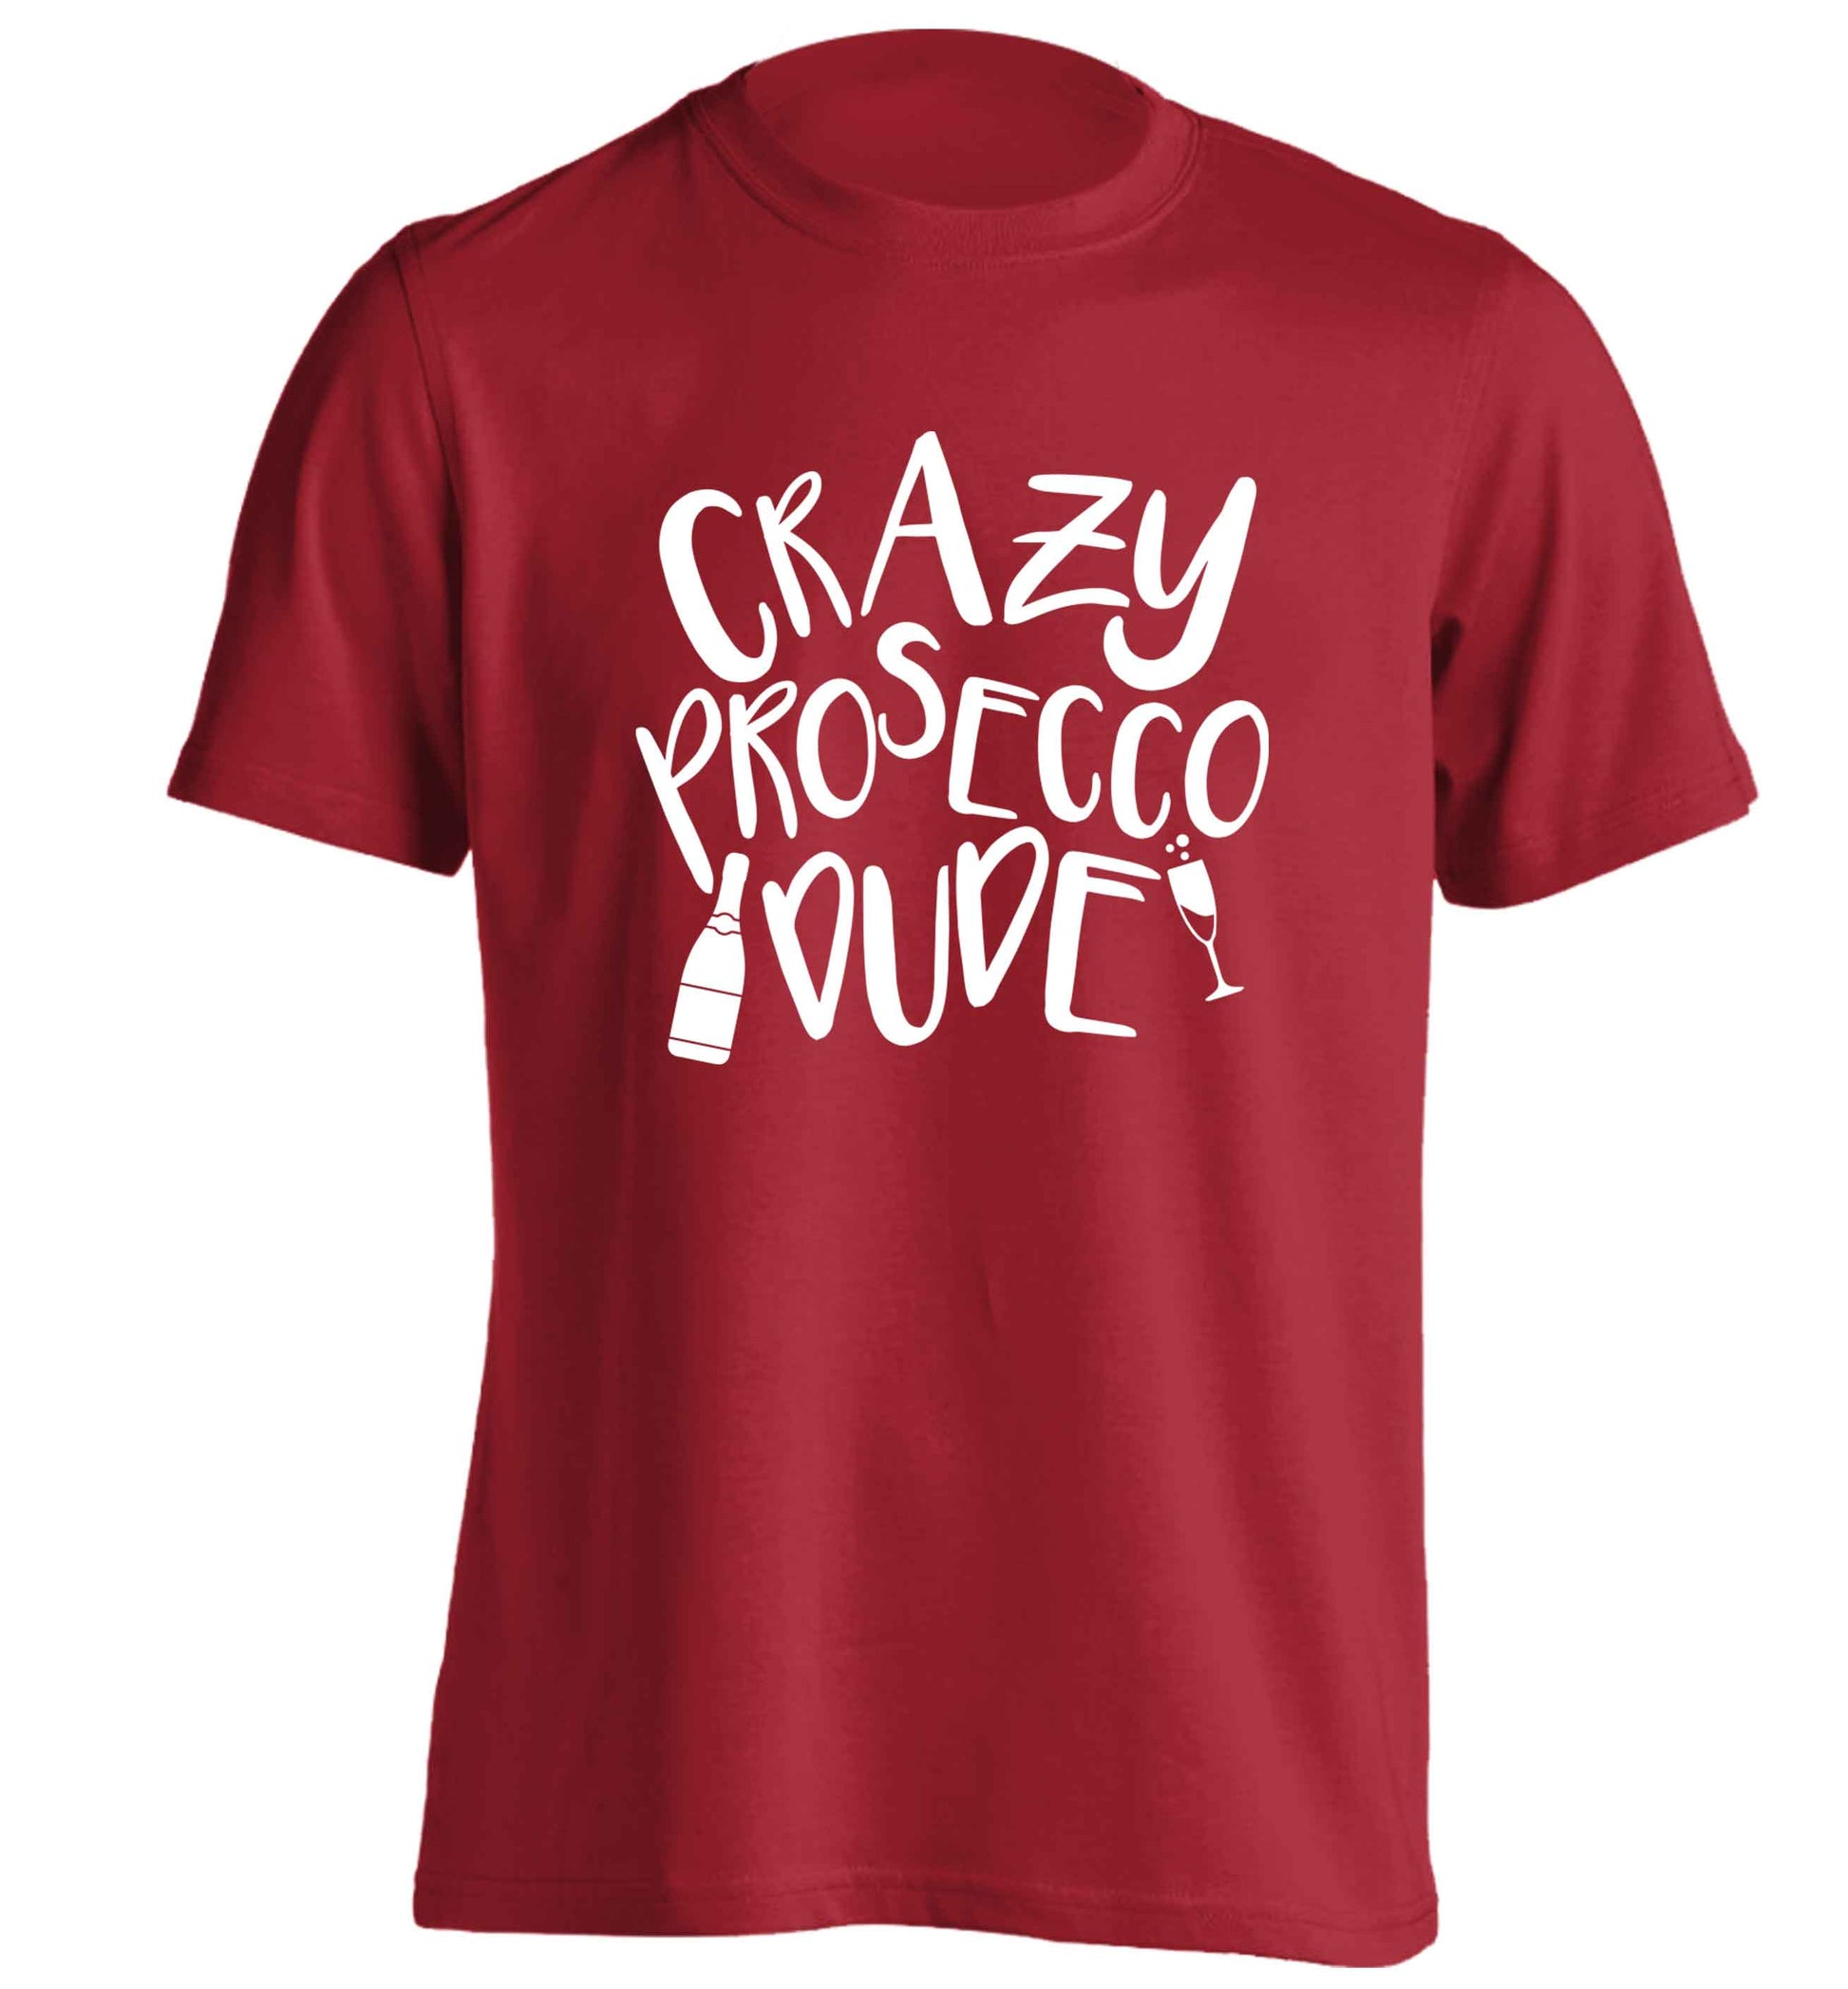 Crazy prosecco dude adults unisex red Tshirt 2XL